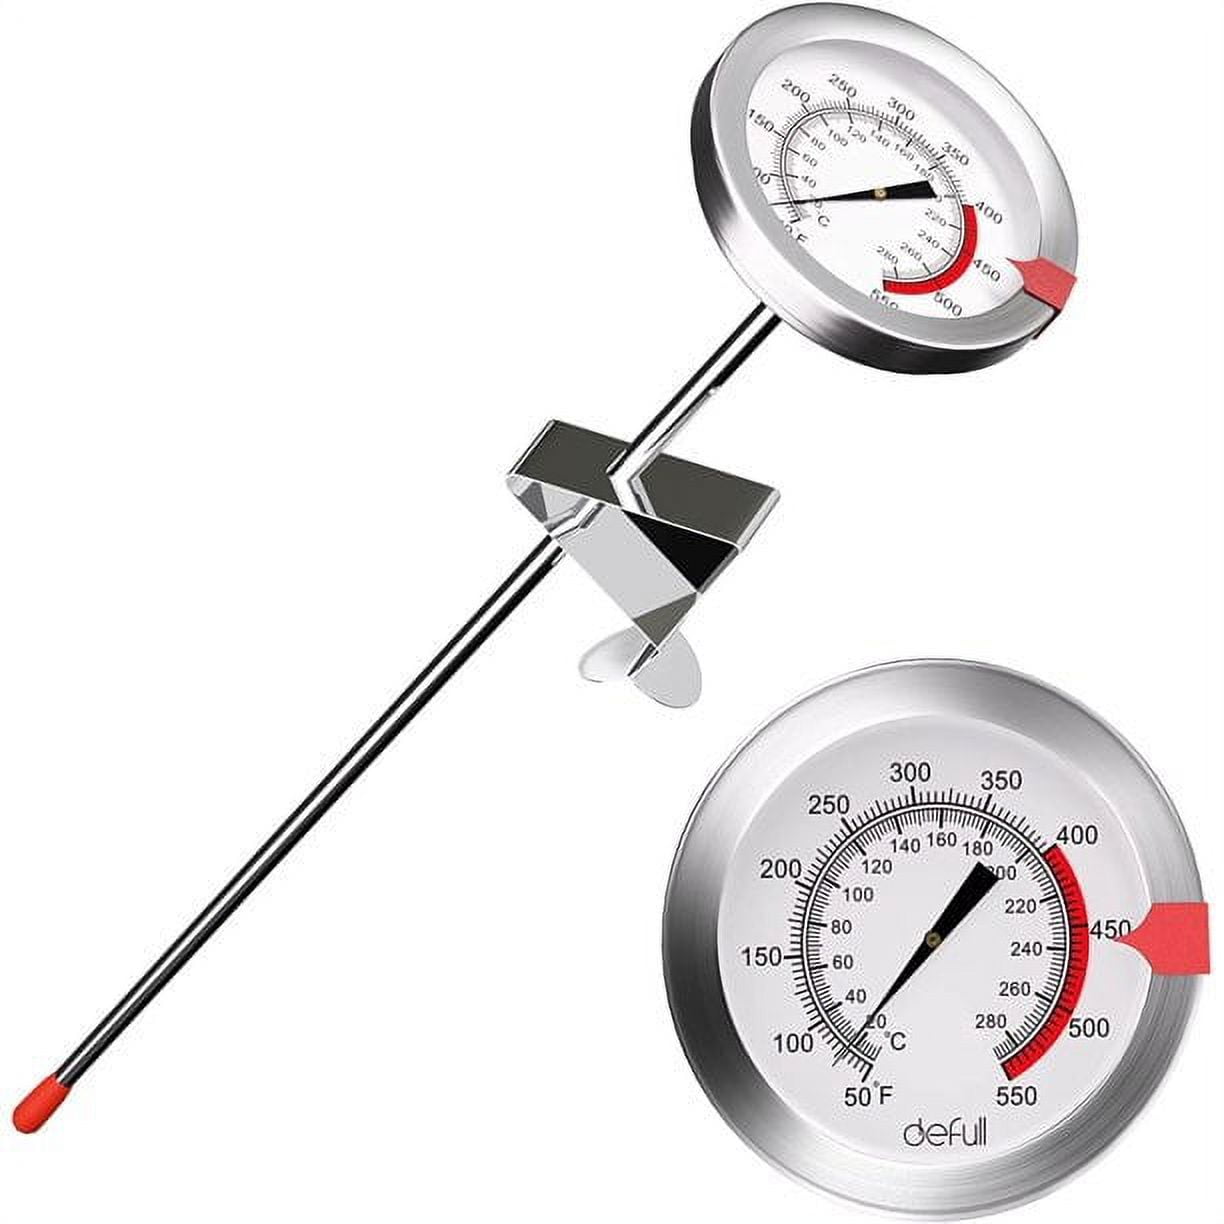 KT THERMO Deep Fry Thermometer With Instant Read,Dial Thermometer,12  Stainless Steel Stem Meat Cooking Thermometer,Best for Turkey,BBQ,Grill